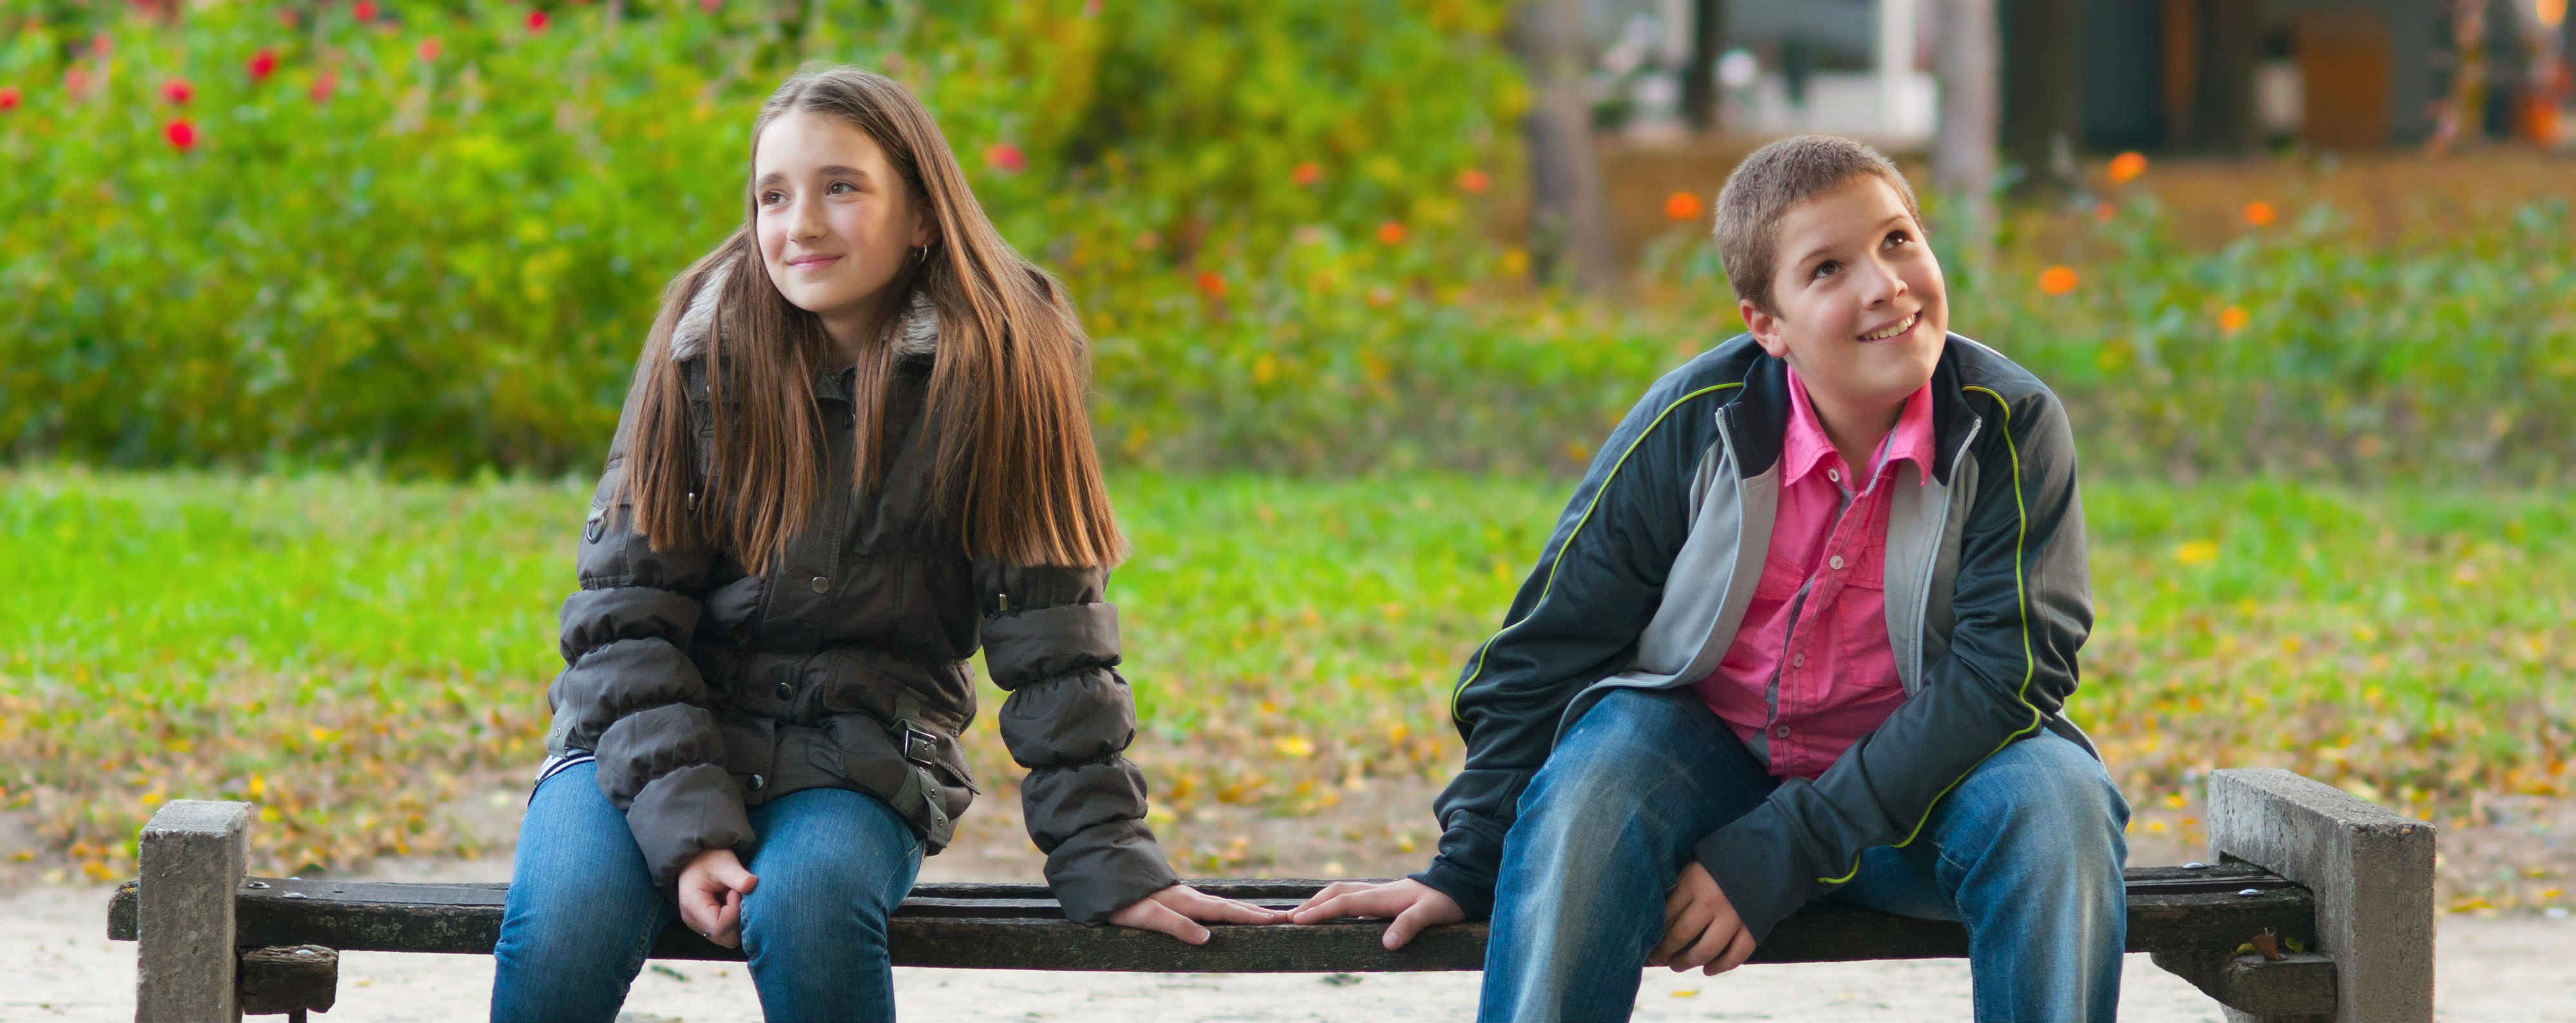 Two children sitting on a bench in a park.